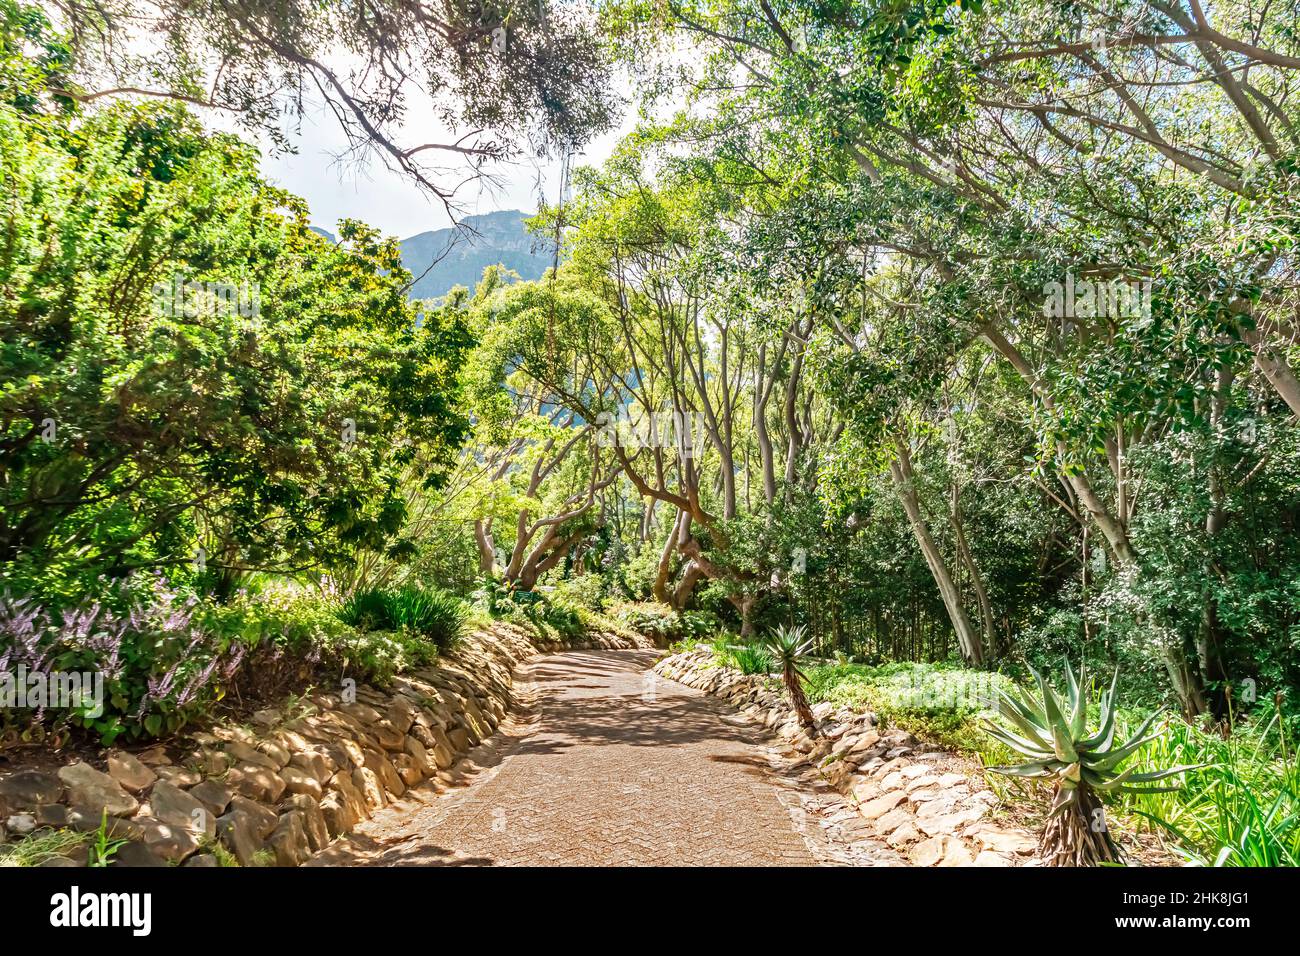 Walking path along the garden vegetation under the shade of trees at Kirstenbosch National Botanical Garden in Cape Town, South Africa. Stock Photo